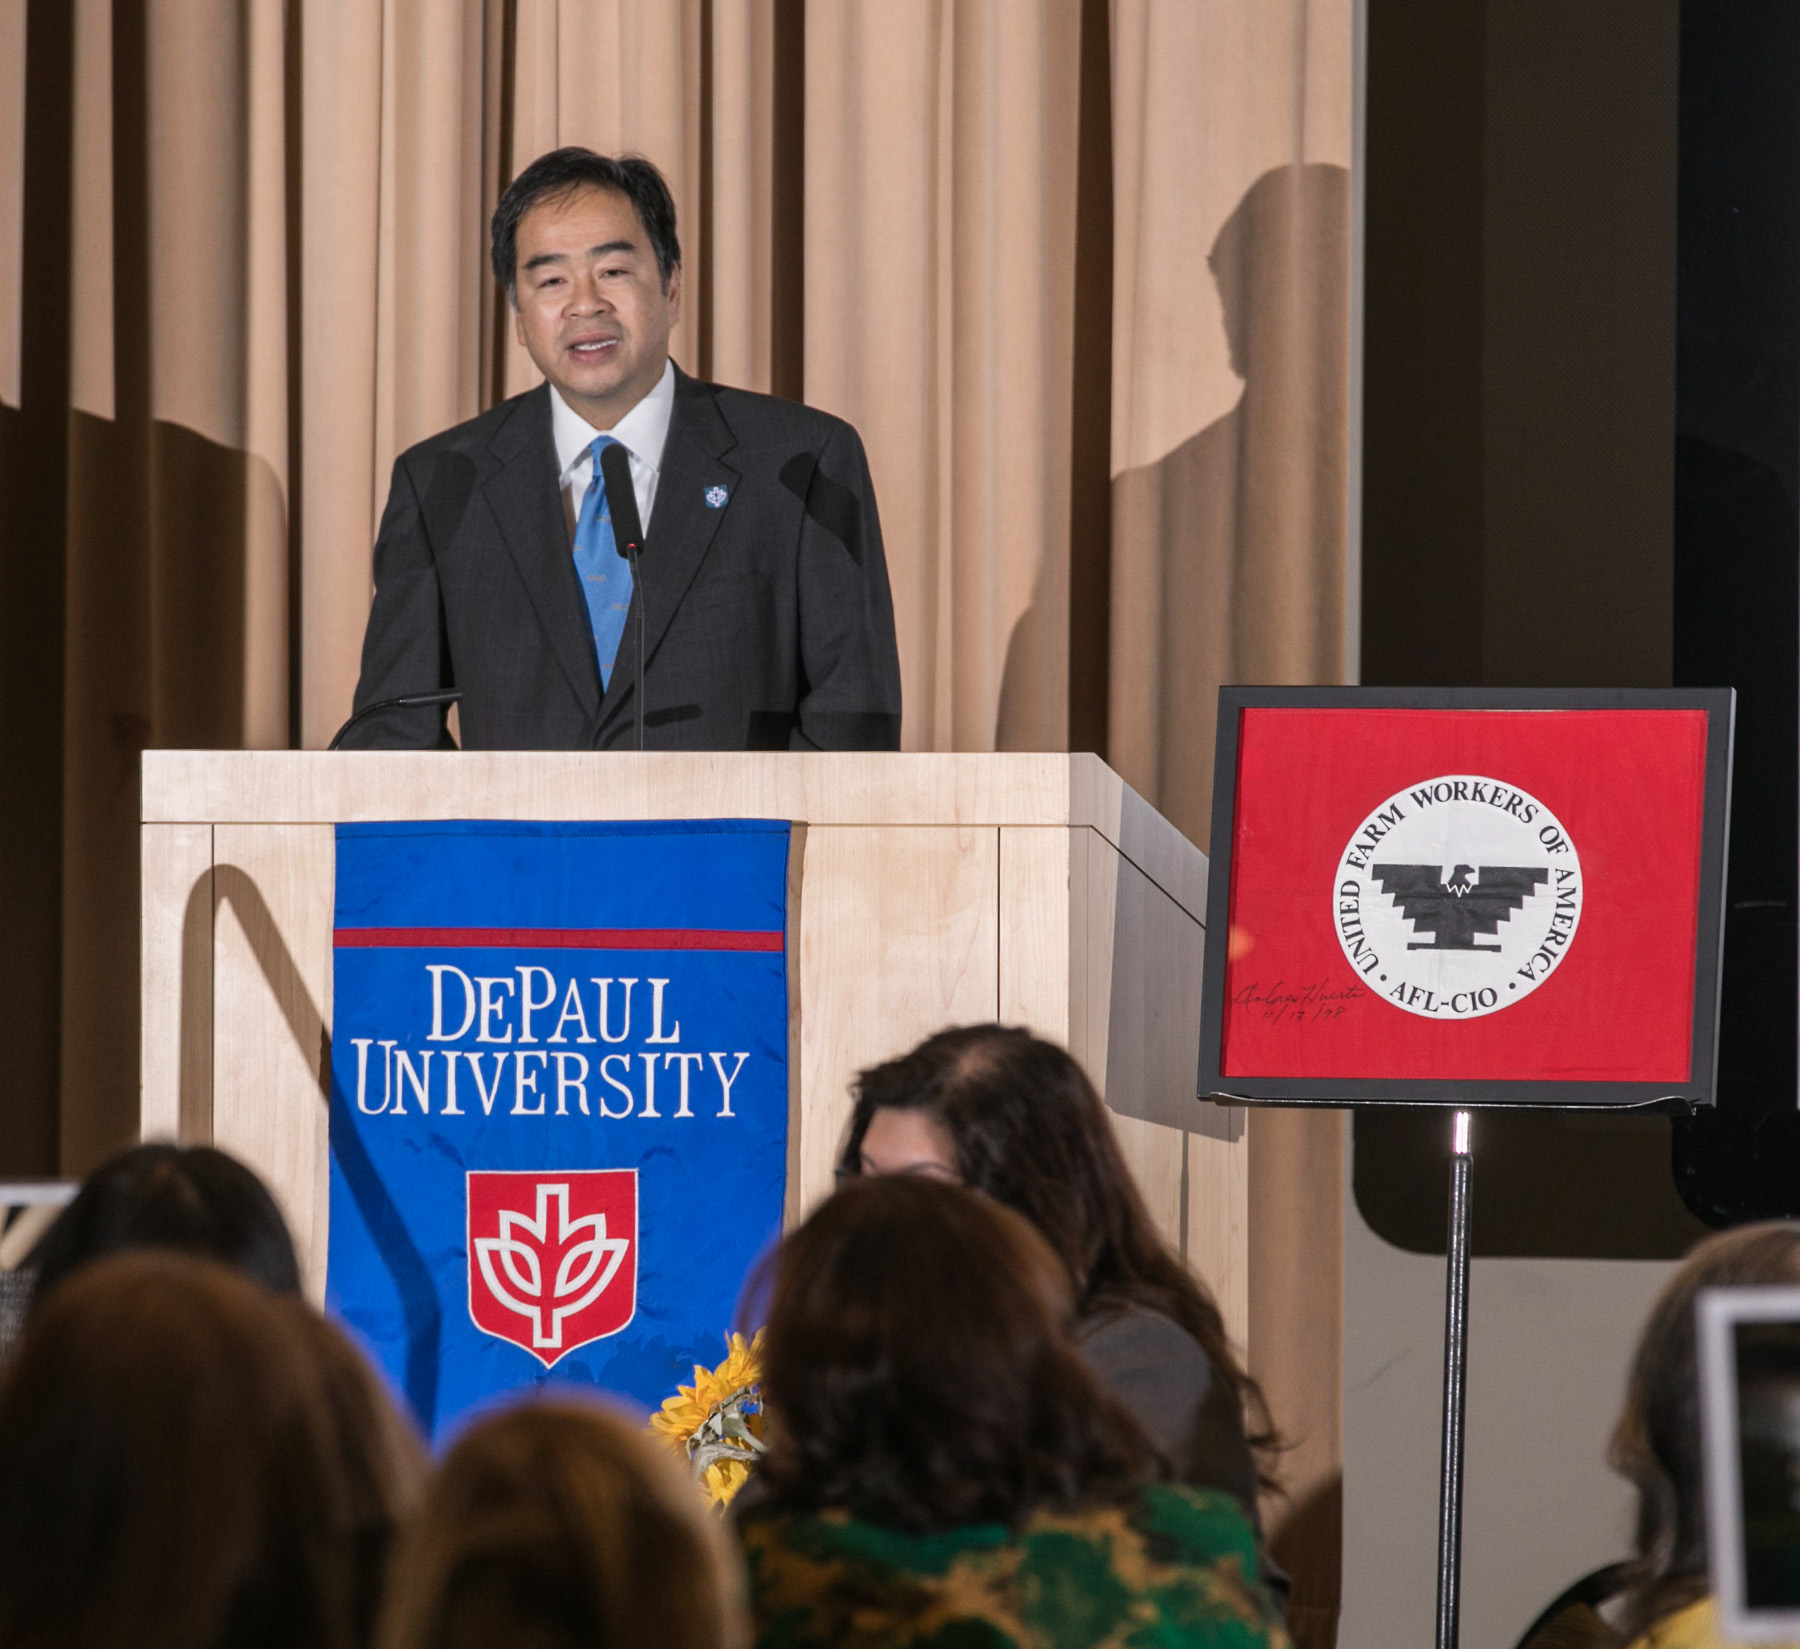 DePaul President A. Gabriel Esteban, Ph.D., welcomes guests to the 2017 Dolores Huerta Prayer Breakfast. The annual event, part of the President's Signature Series, was hosted by the Office of Institutional Diversity and Equity and honors Huerta, an activist, organizer, feminist, civil and labor rights hero and recipient of the Presidential Medal of Freedom.  (DePaul University/Jamie Moncrief)